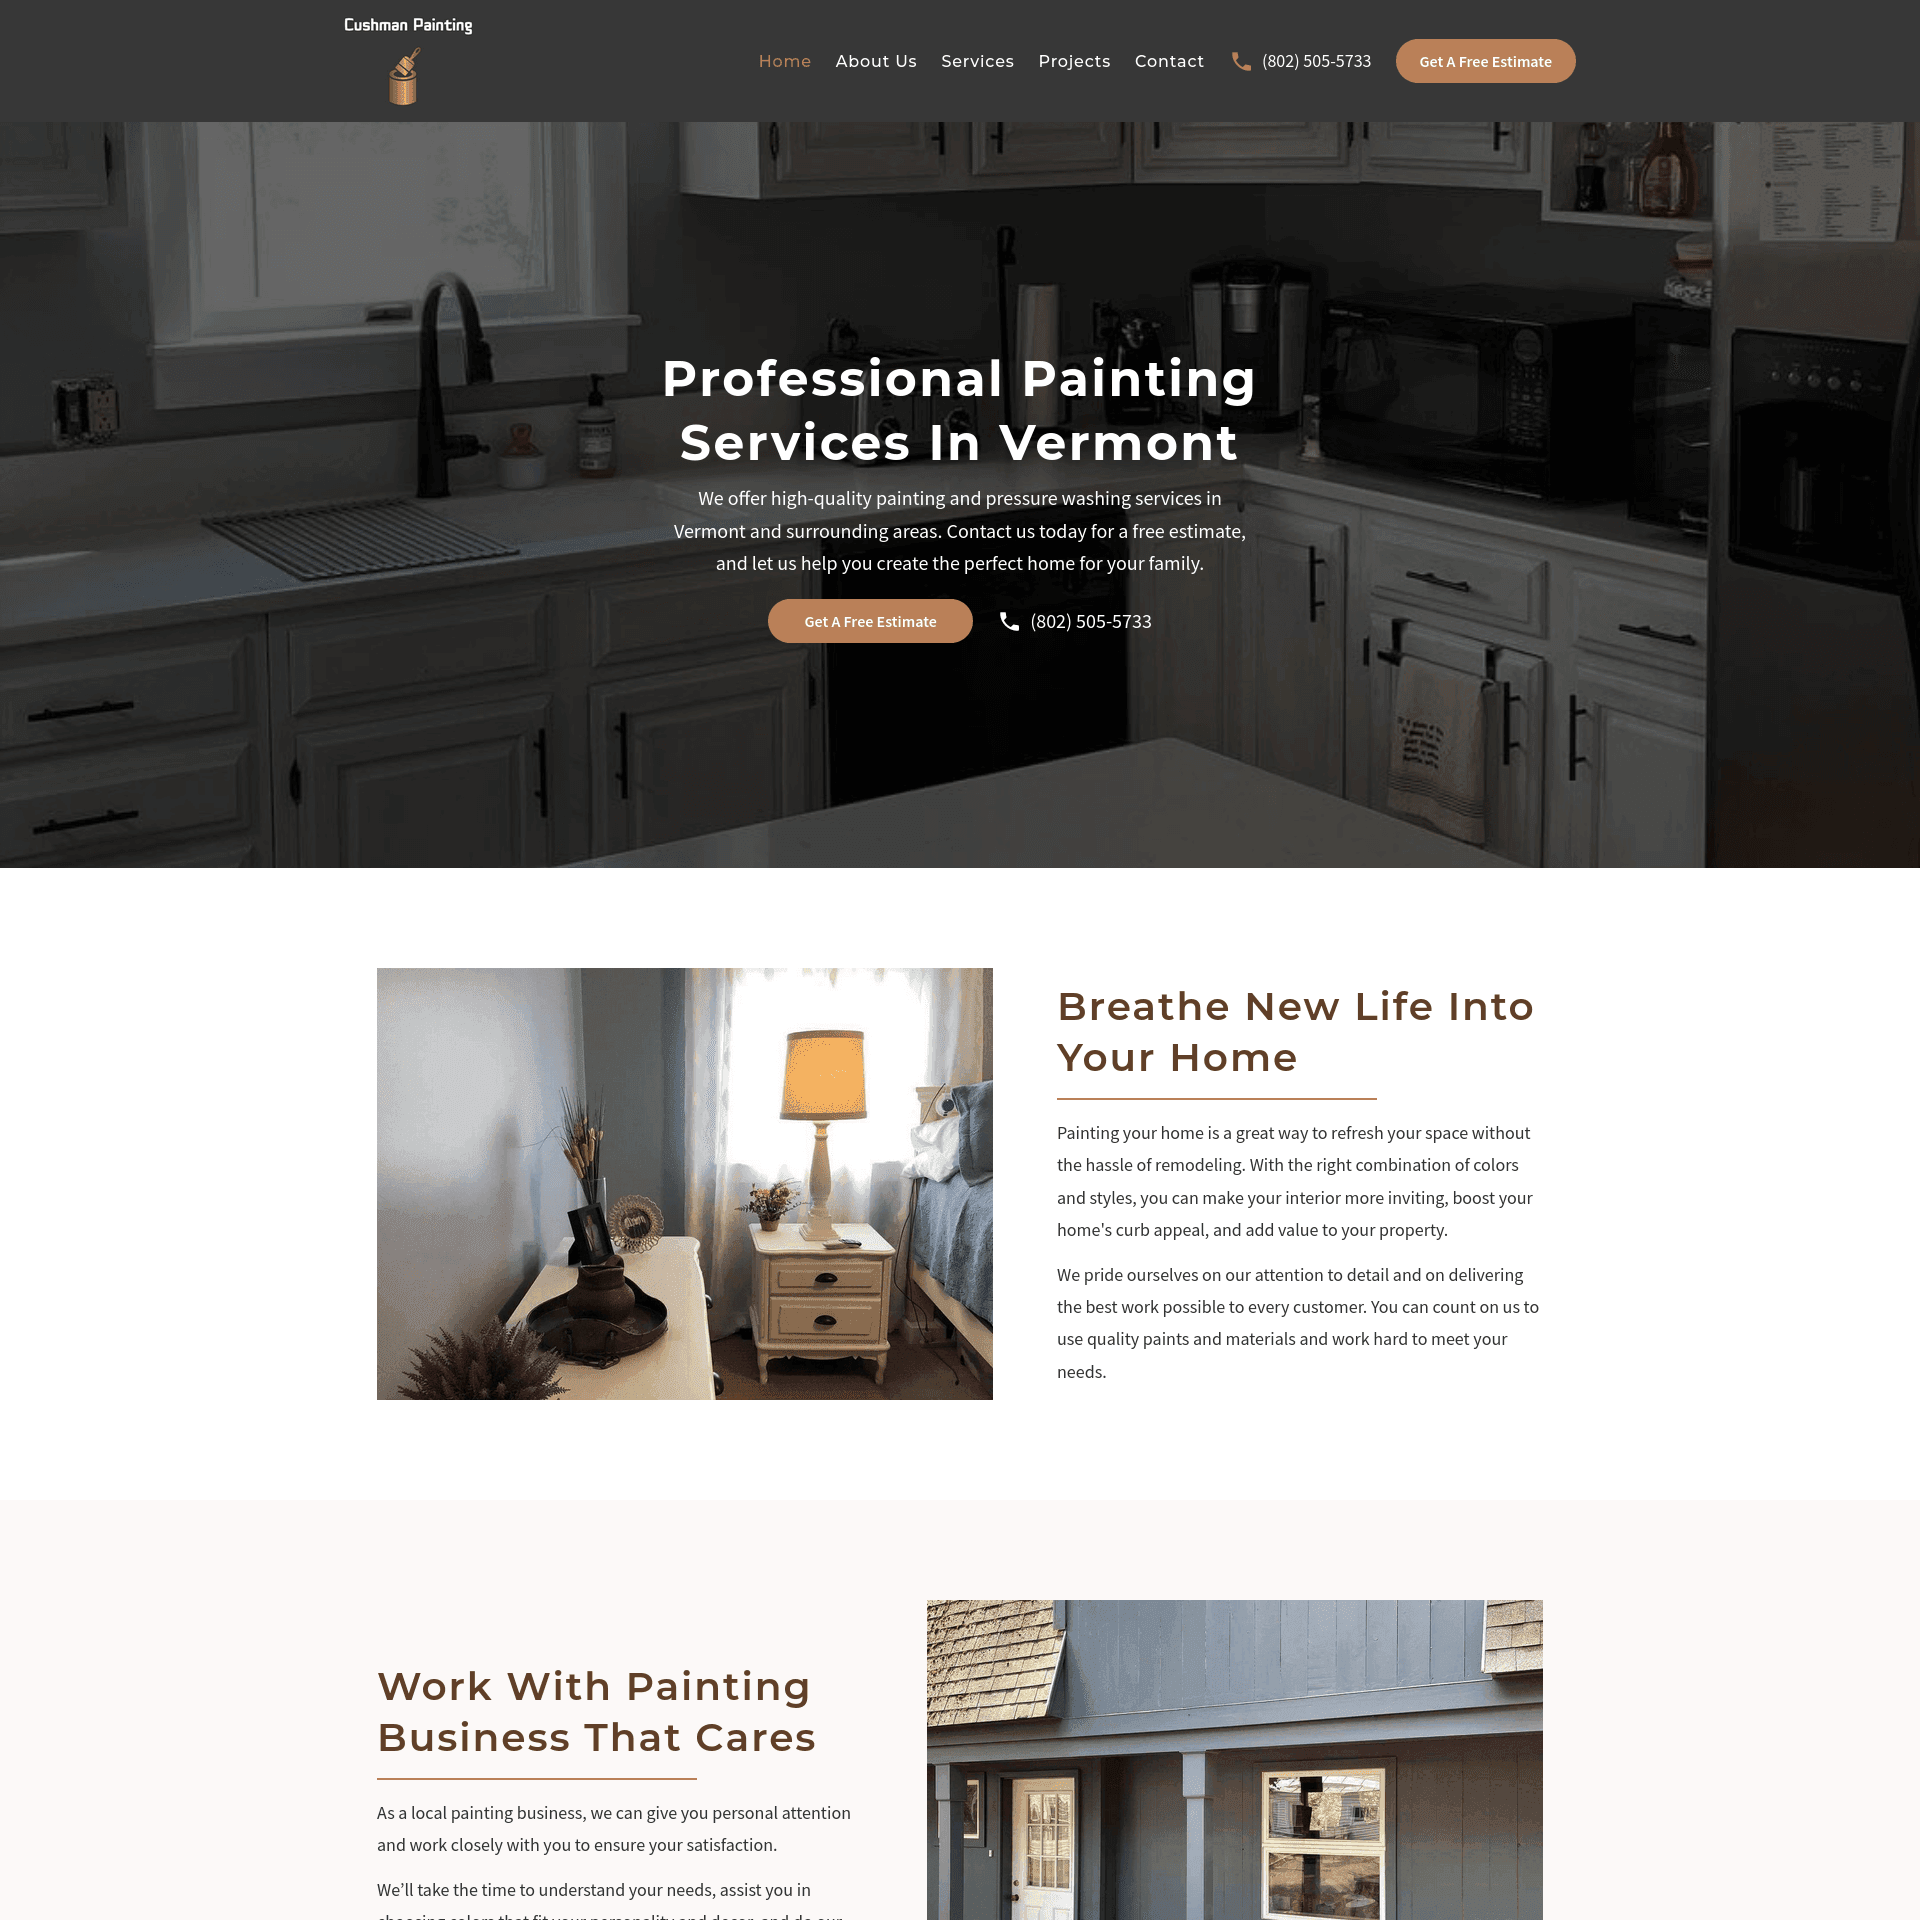 Website for Cushman Painting